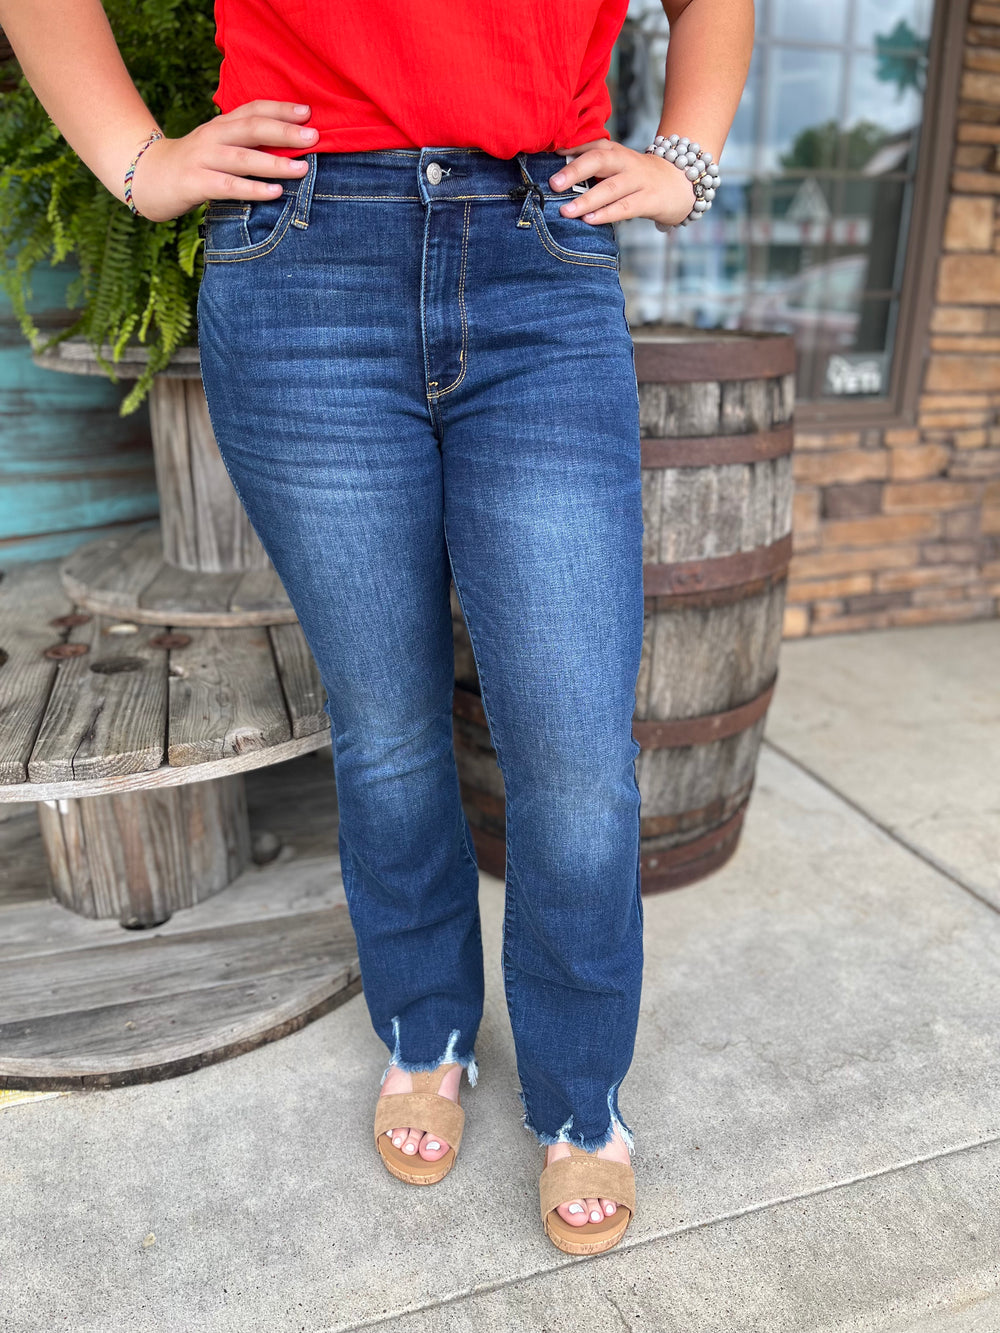 Judy Blue Starry Night Mid Rise Bootcut Jeans-Jeans-Judy Blue-Evergreen Boutique, Women’s Fashion Boutique in Santa Claus, Indiana